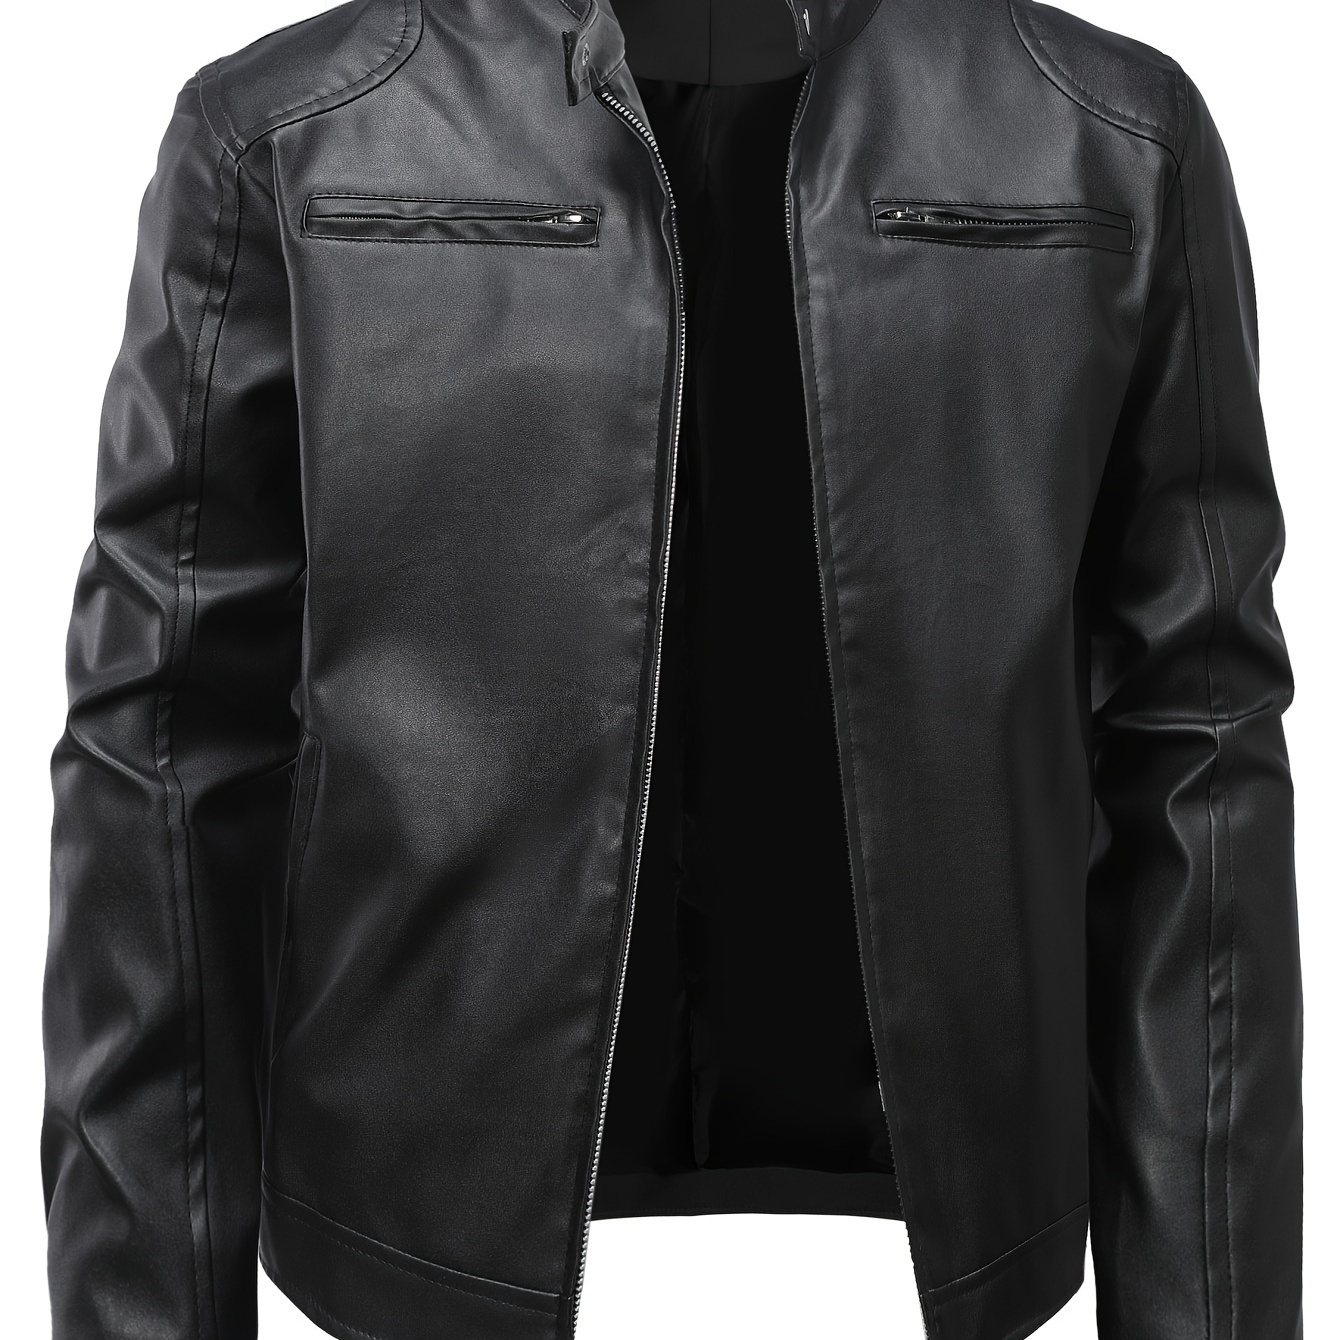 

Men's Solid Pu Leather Band Collar Jacket For Motorcycle Riding, Slim Fit Business Jacket